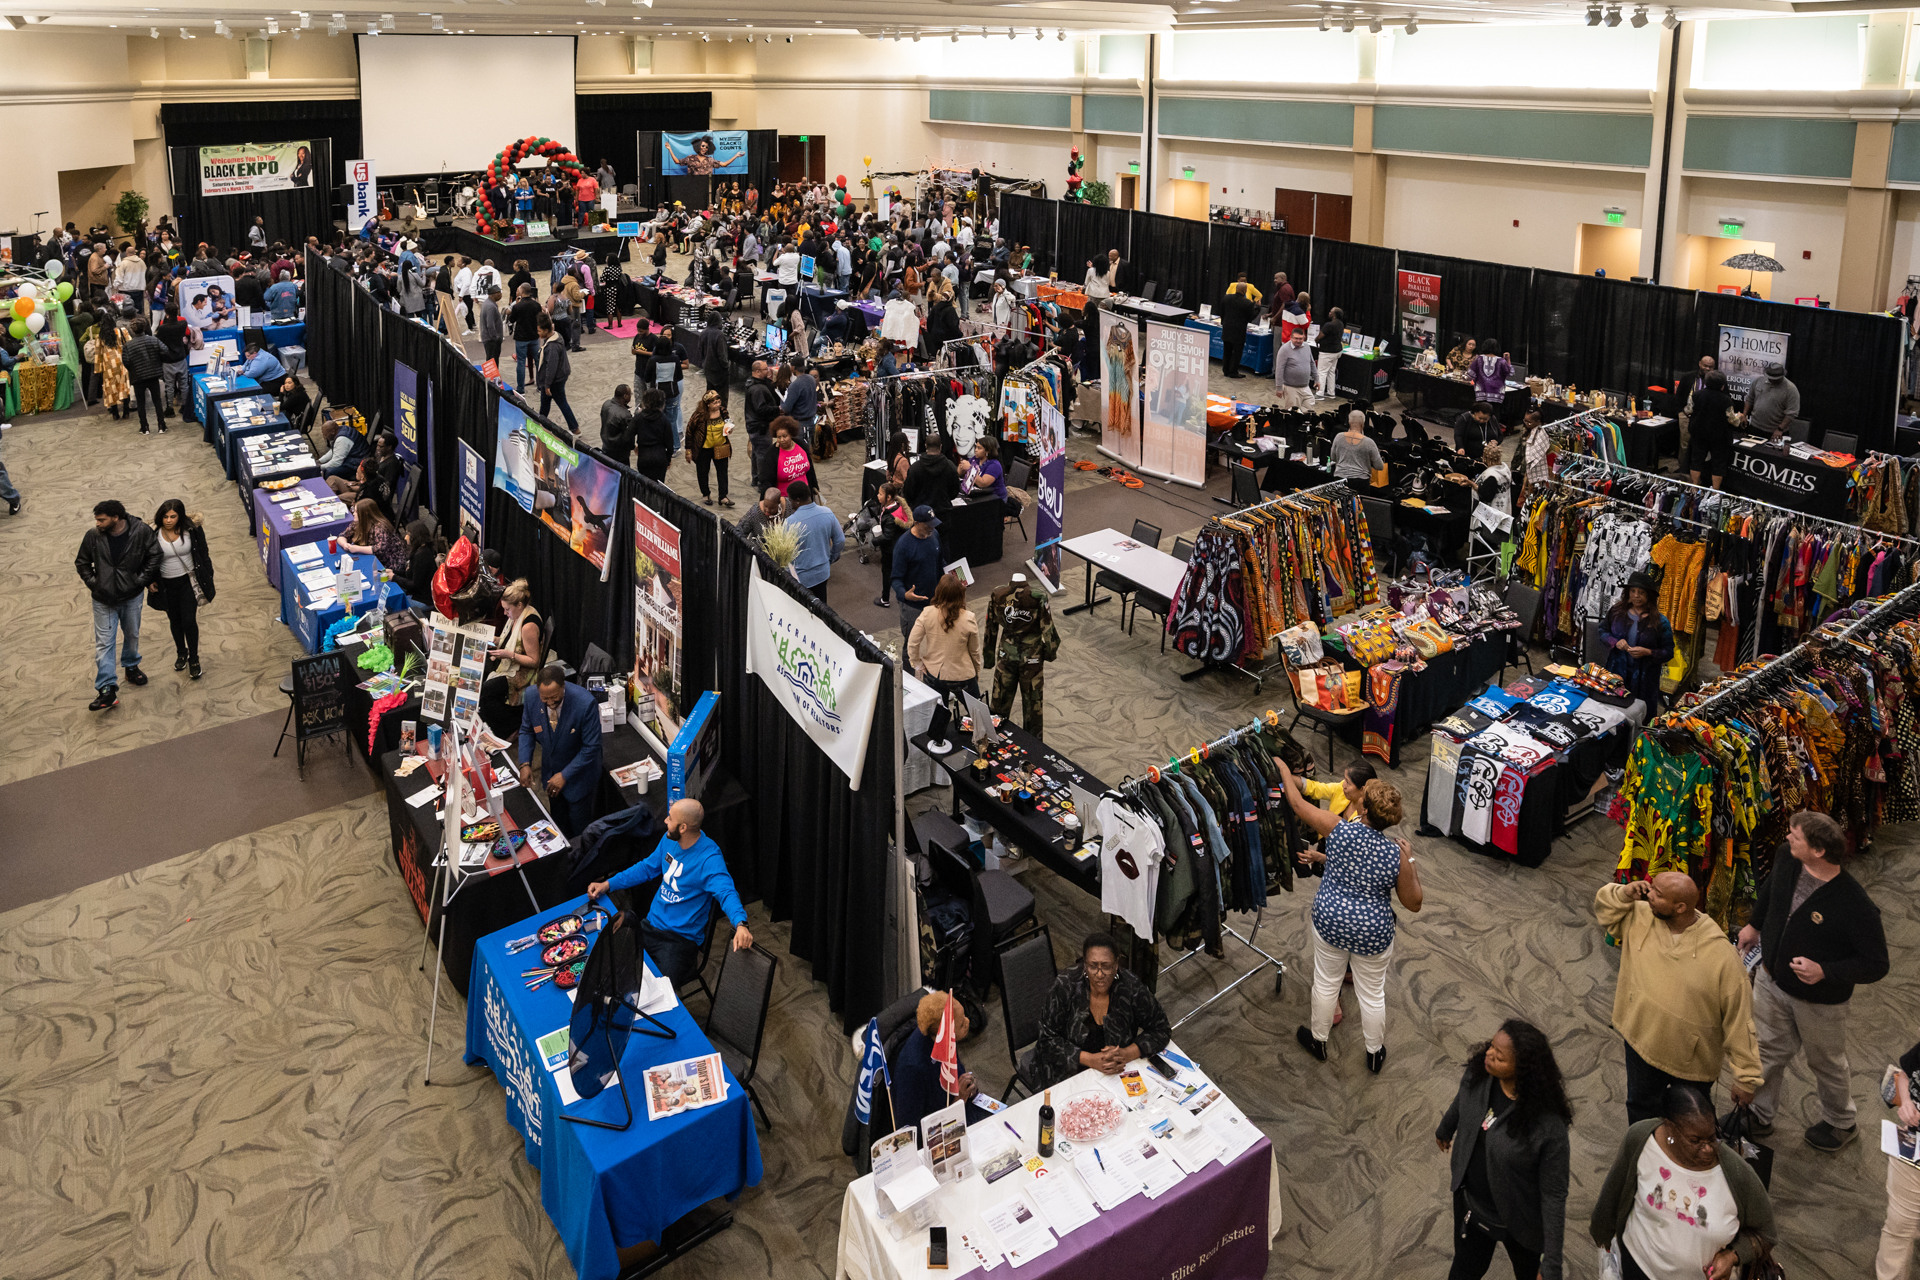 Tables, presenters and attendees in the University Union ballroom during the Sacramento Black Expo